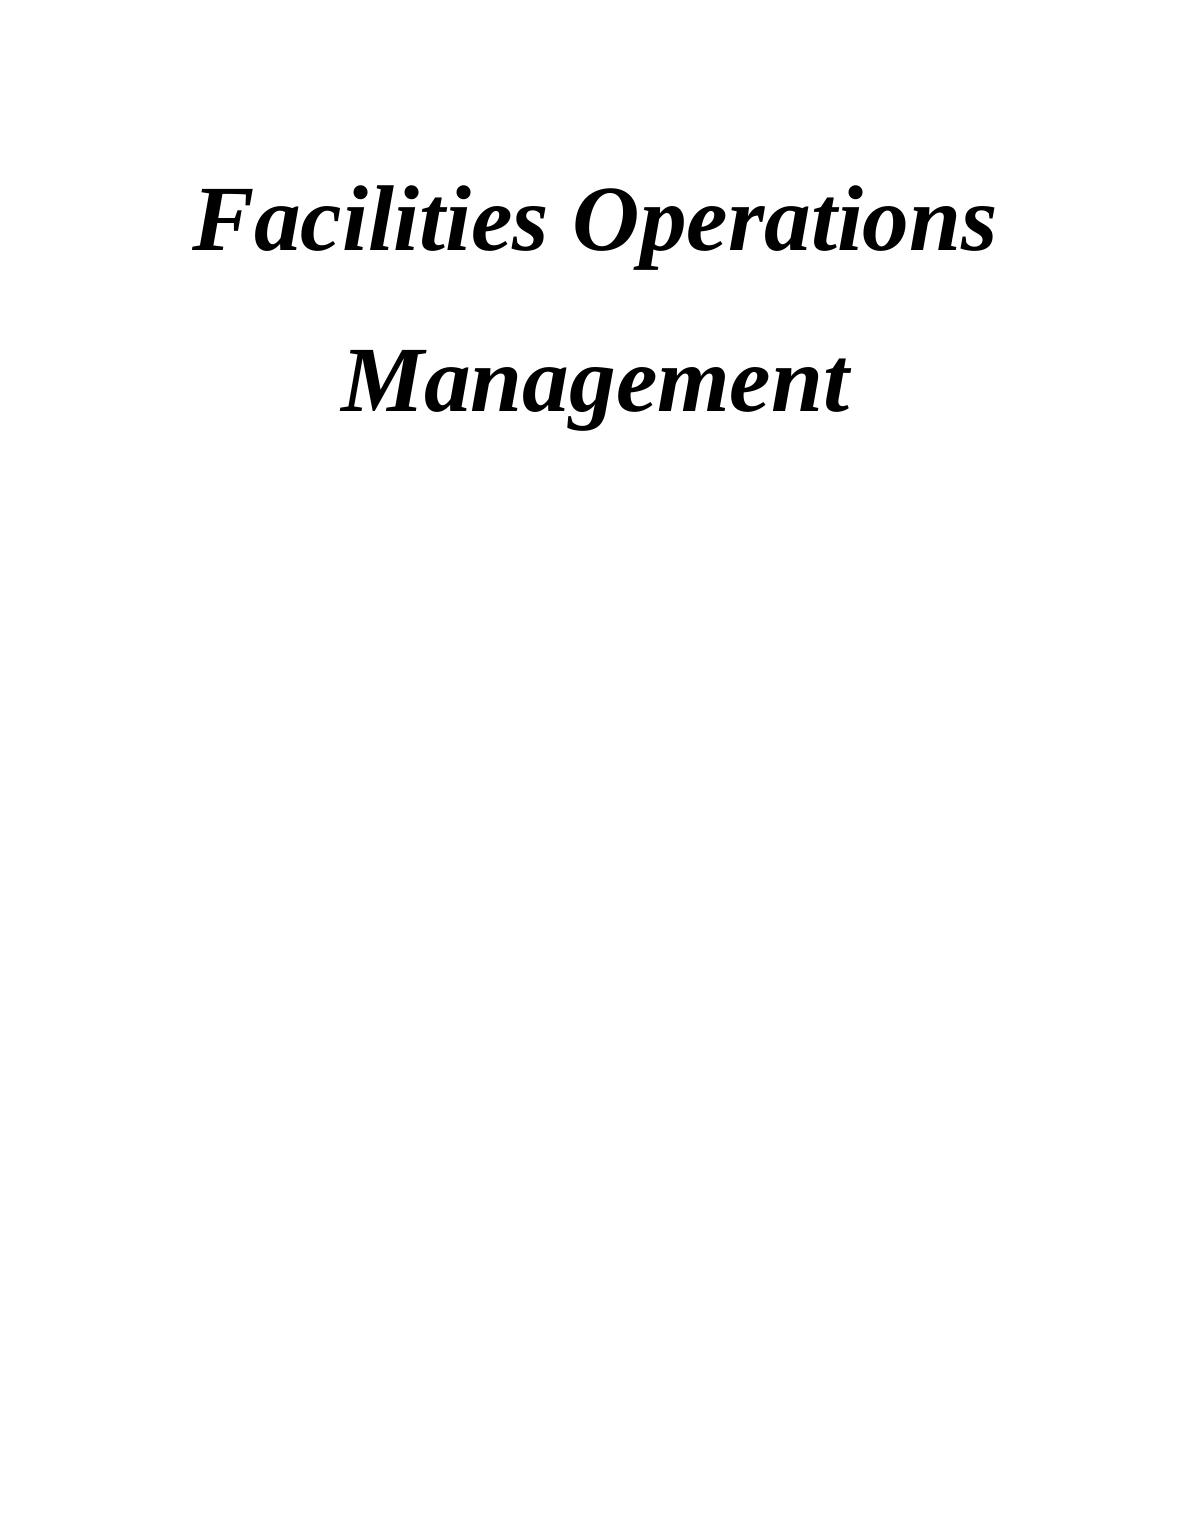 Assignment on Facilities Operations Management_1